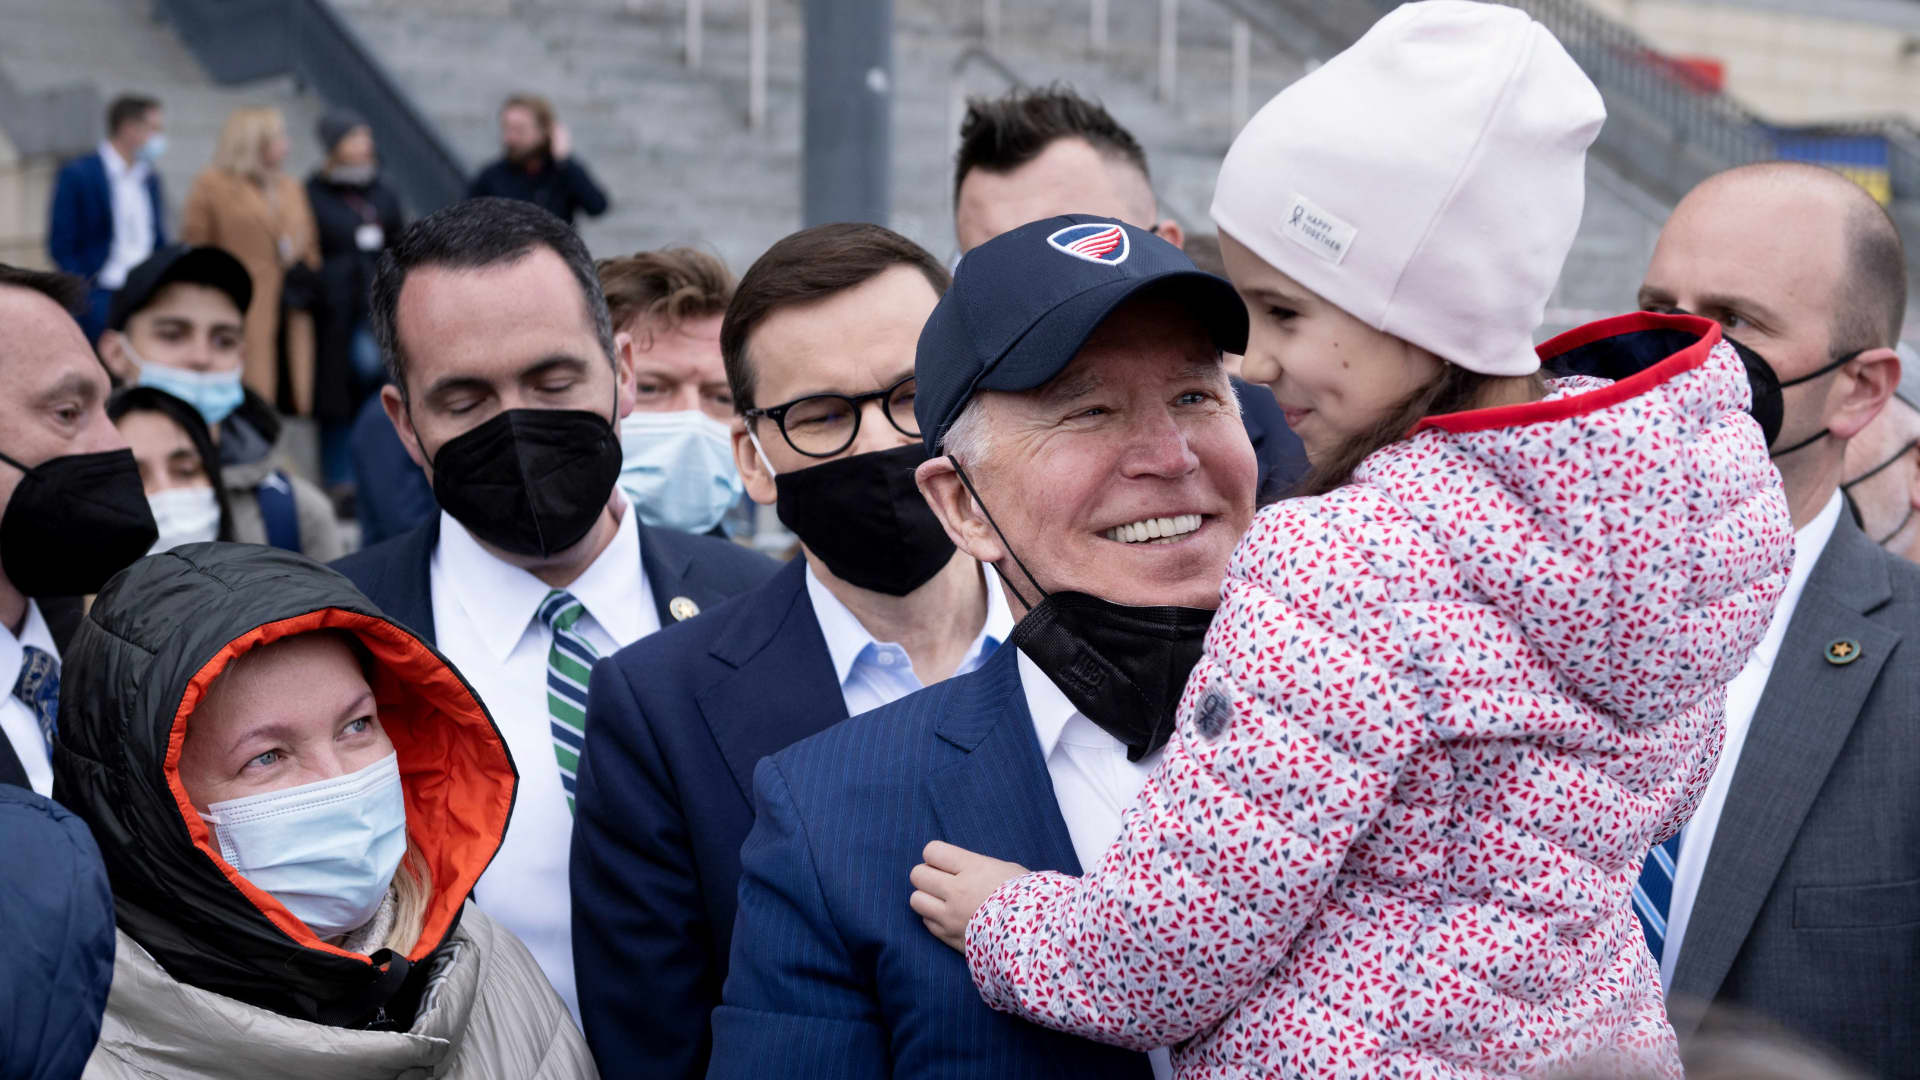 President Joe Biden holds a girl on his arm as he and Polish Prime Minister Mateusz Morawiecki meet with Ukrainian refugees at PGE Narodowy Stadium in Warsaw on March 26, 2022.